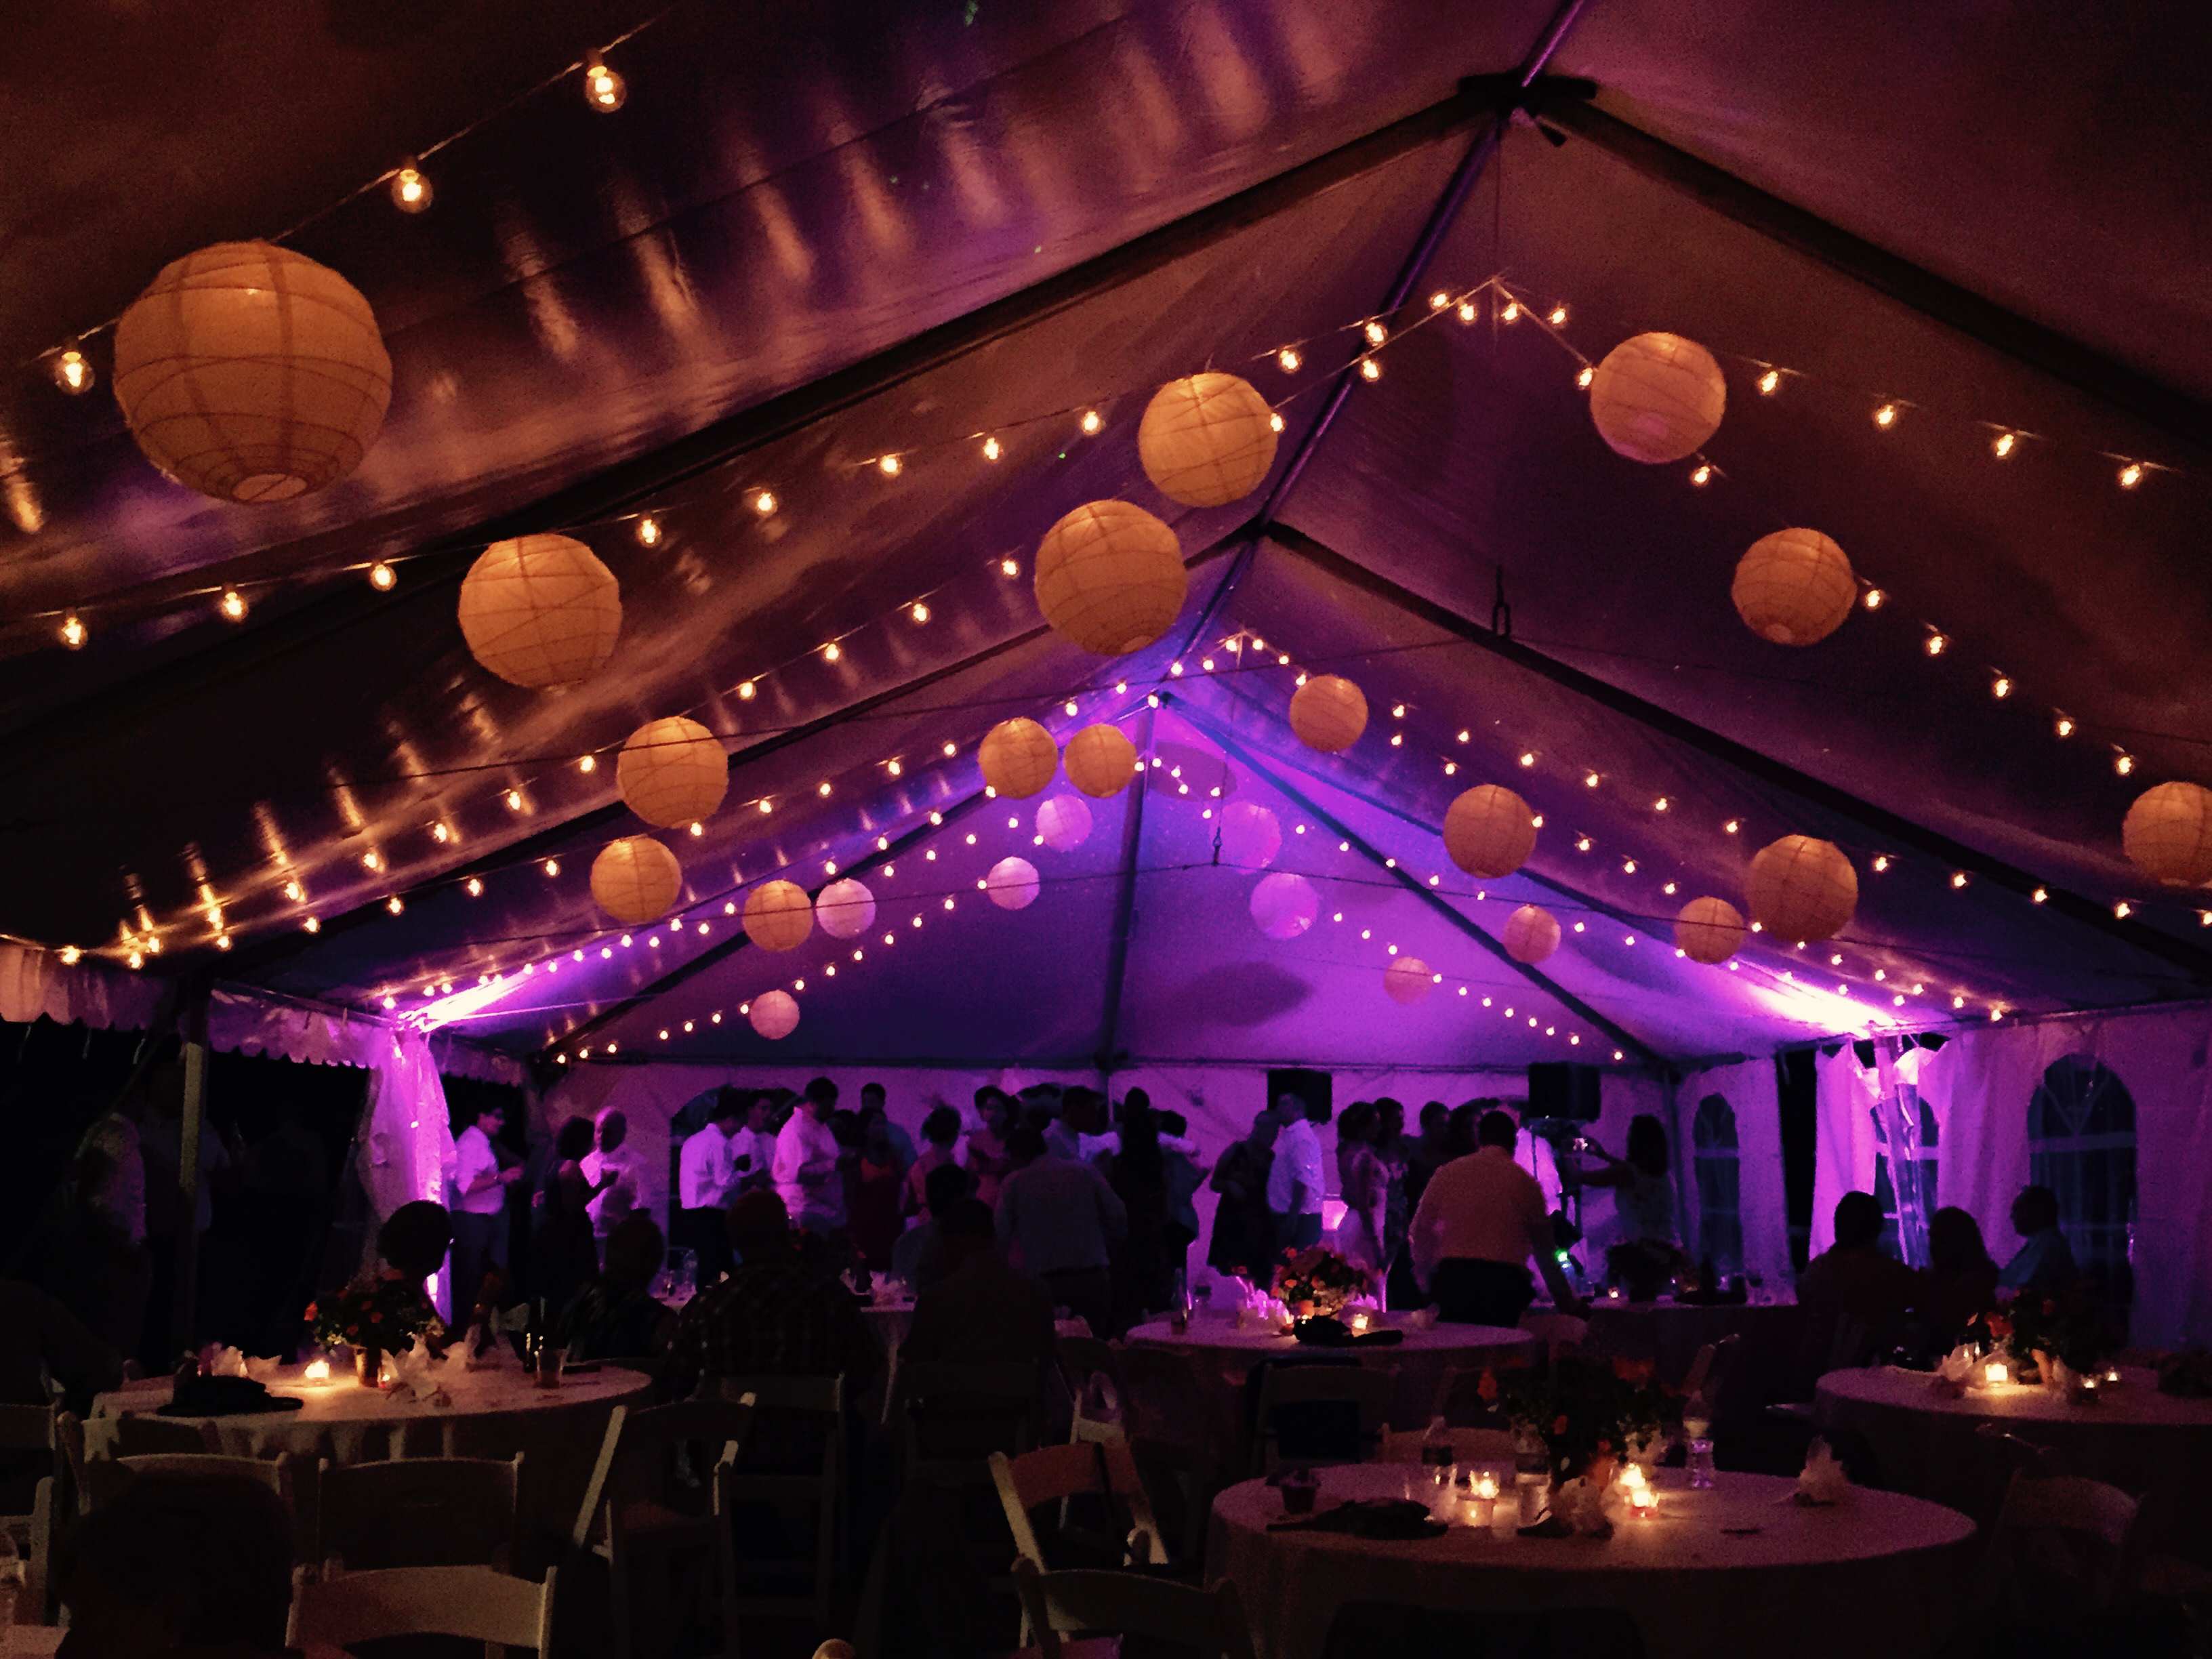 Multi Colored Paper Lanterns in a Frame Tent at Night